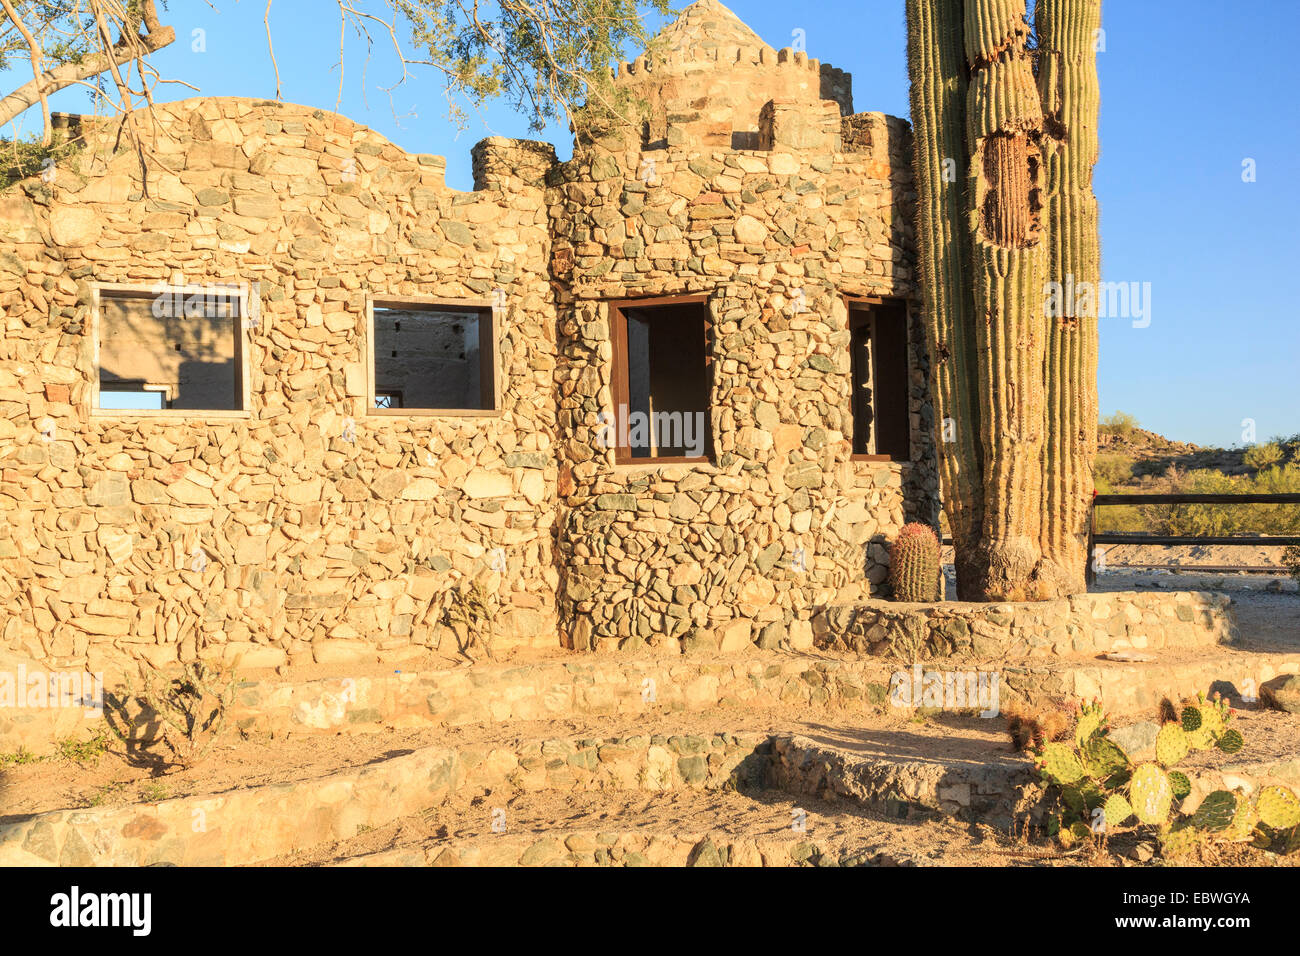 Scorpion Gulch, an abandoned trading post located in South Mountain Park, Phoenix, Arizona; early morning. Stock Photo